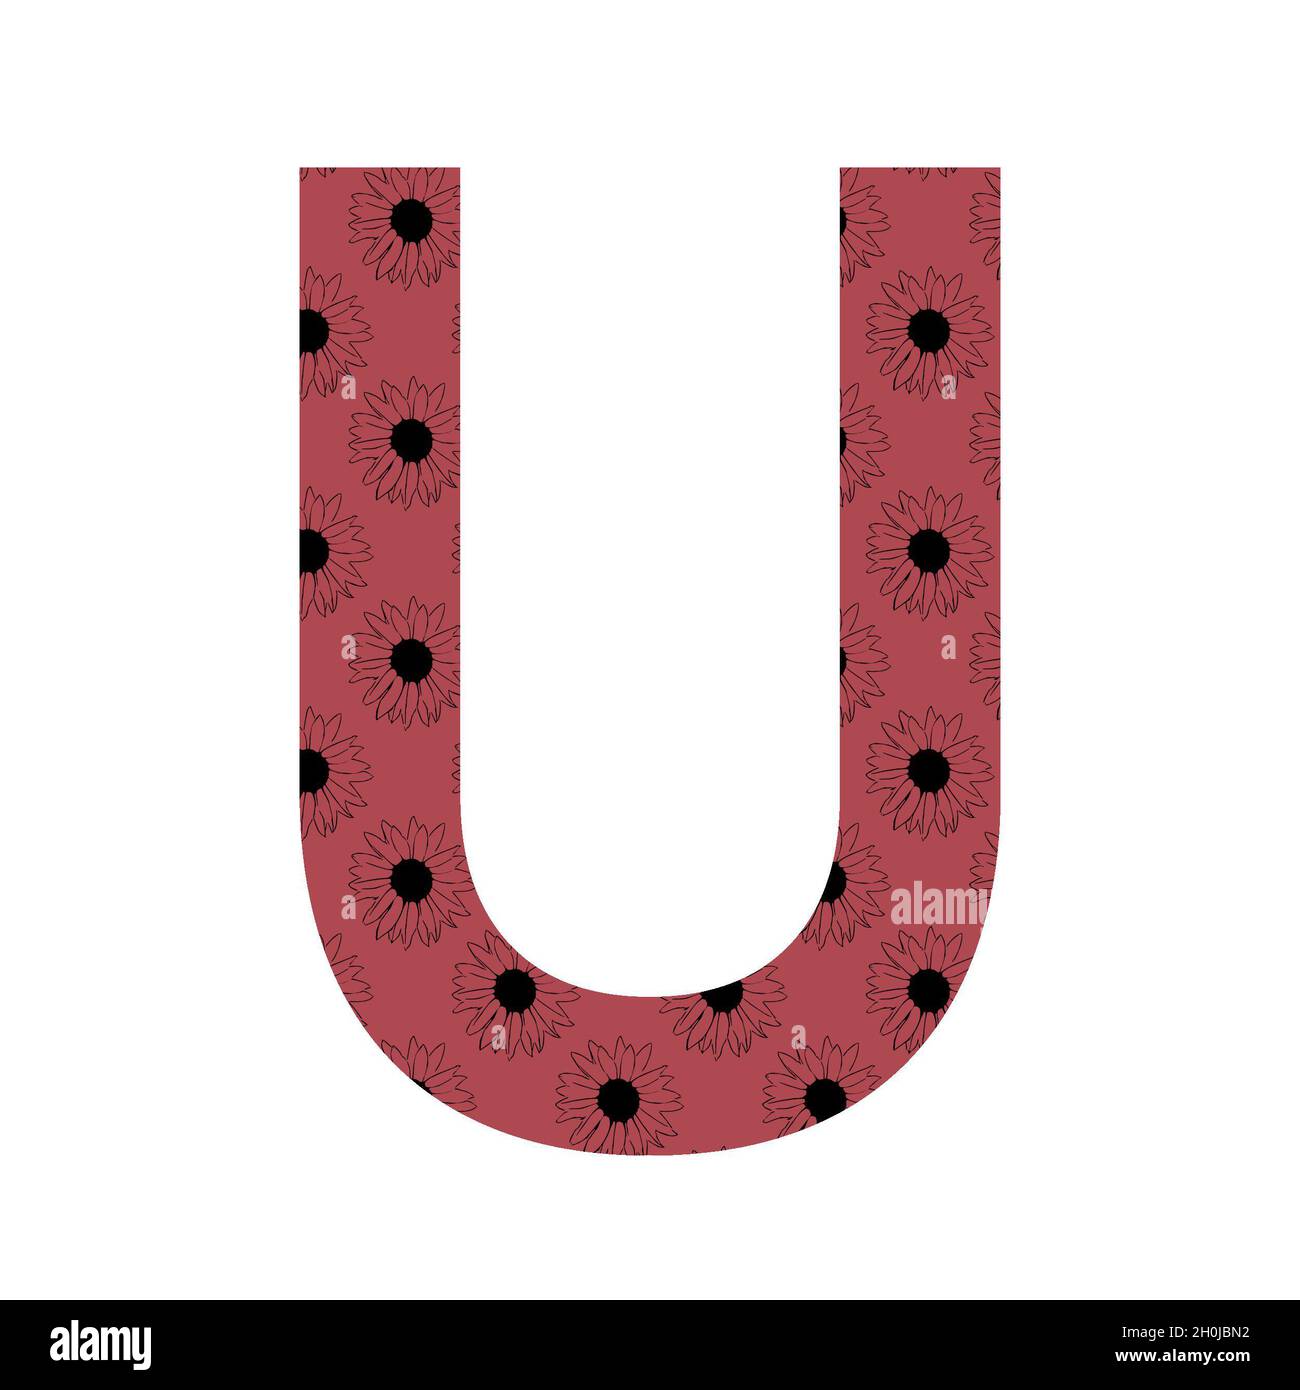 Letter U of the alphabet made with a pattern of sunflowers with a dark pink background, isolated on a white background Stock Photo